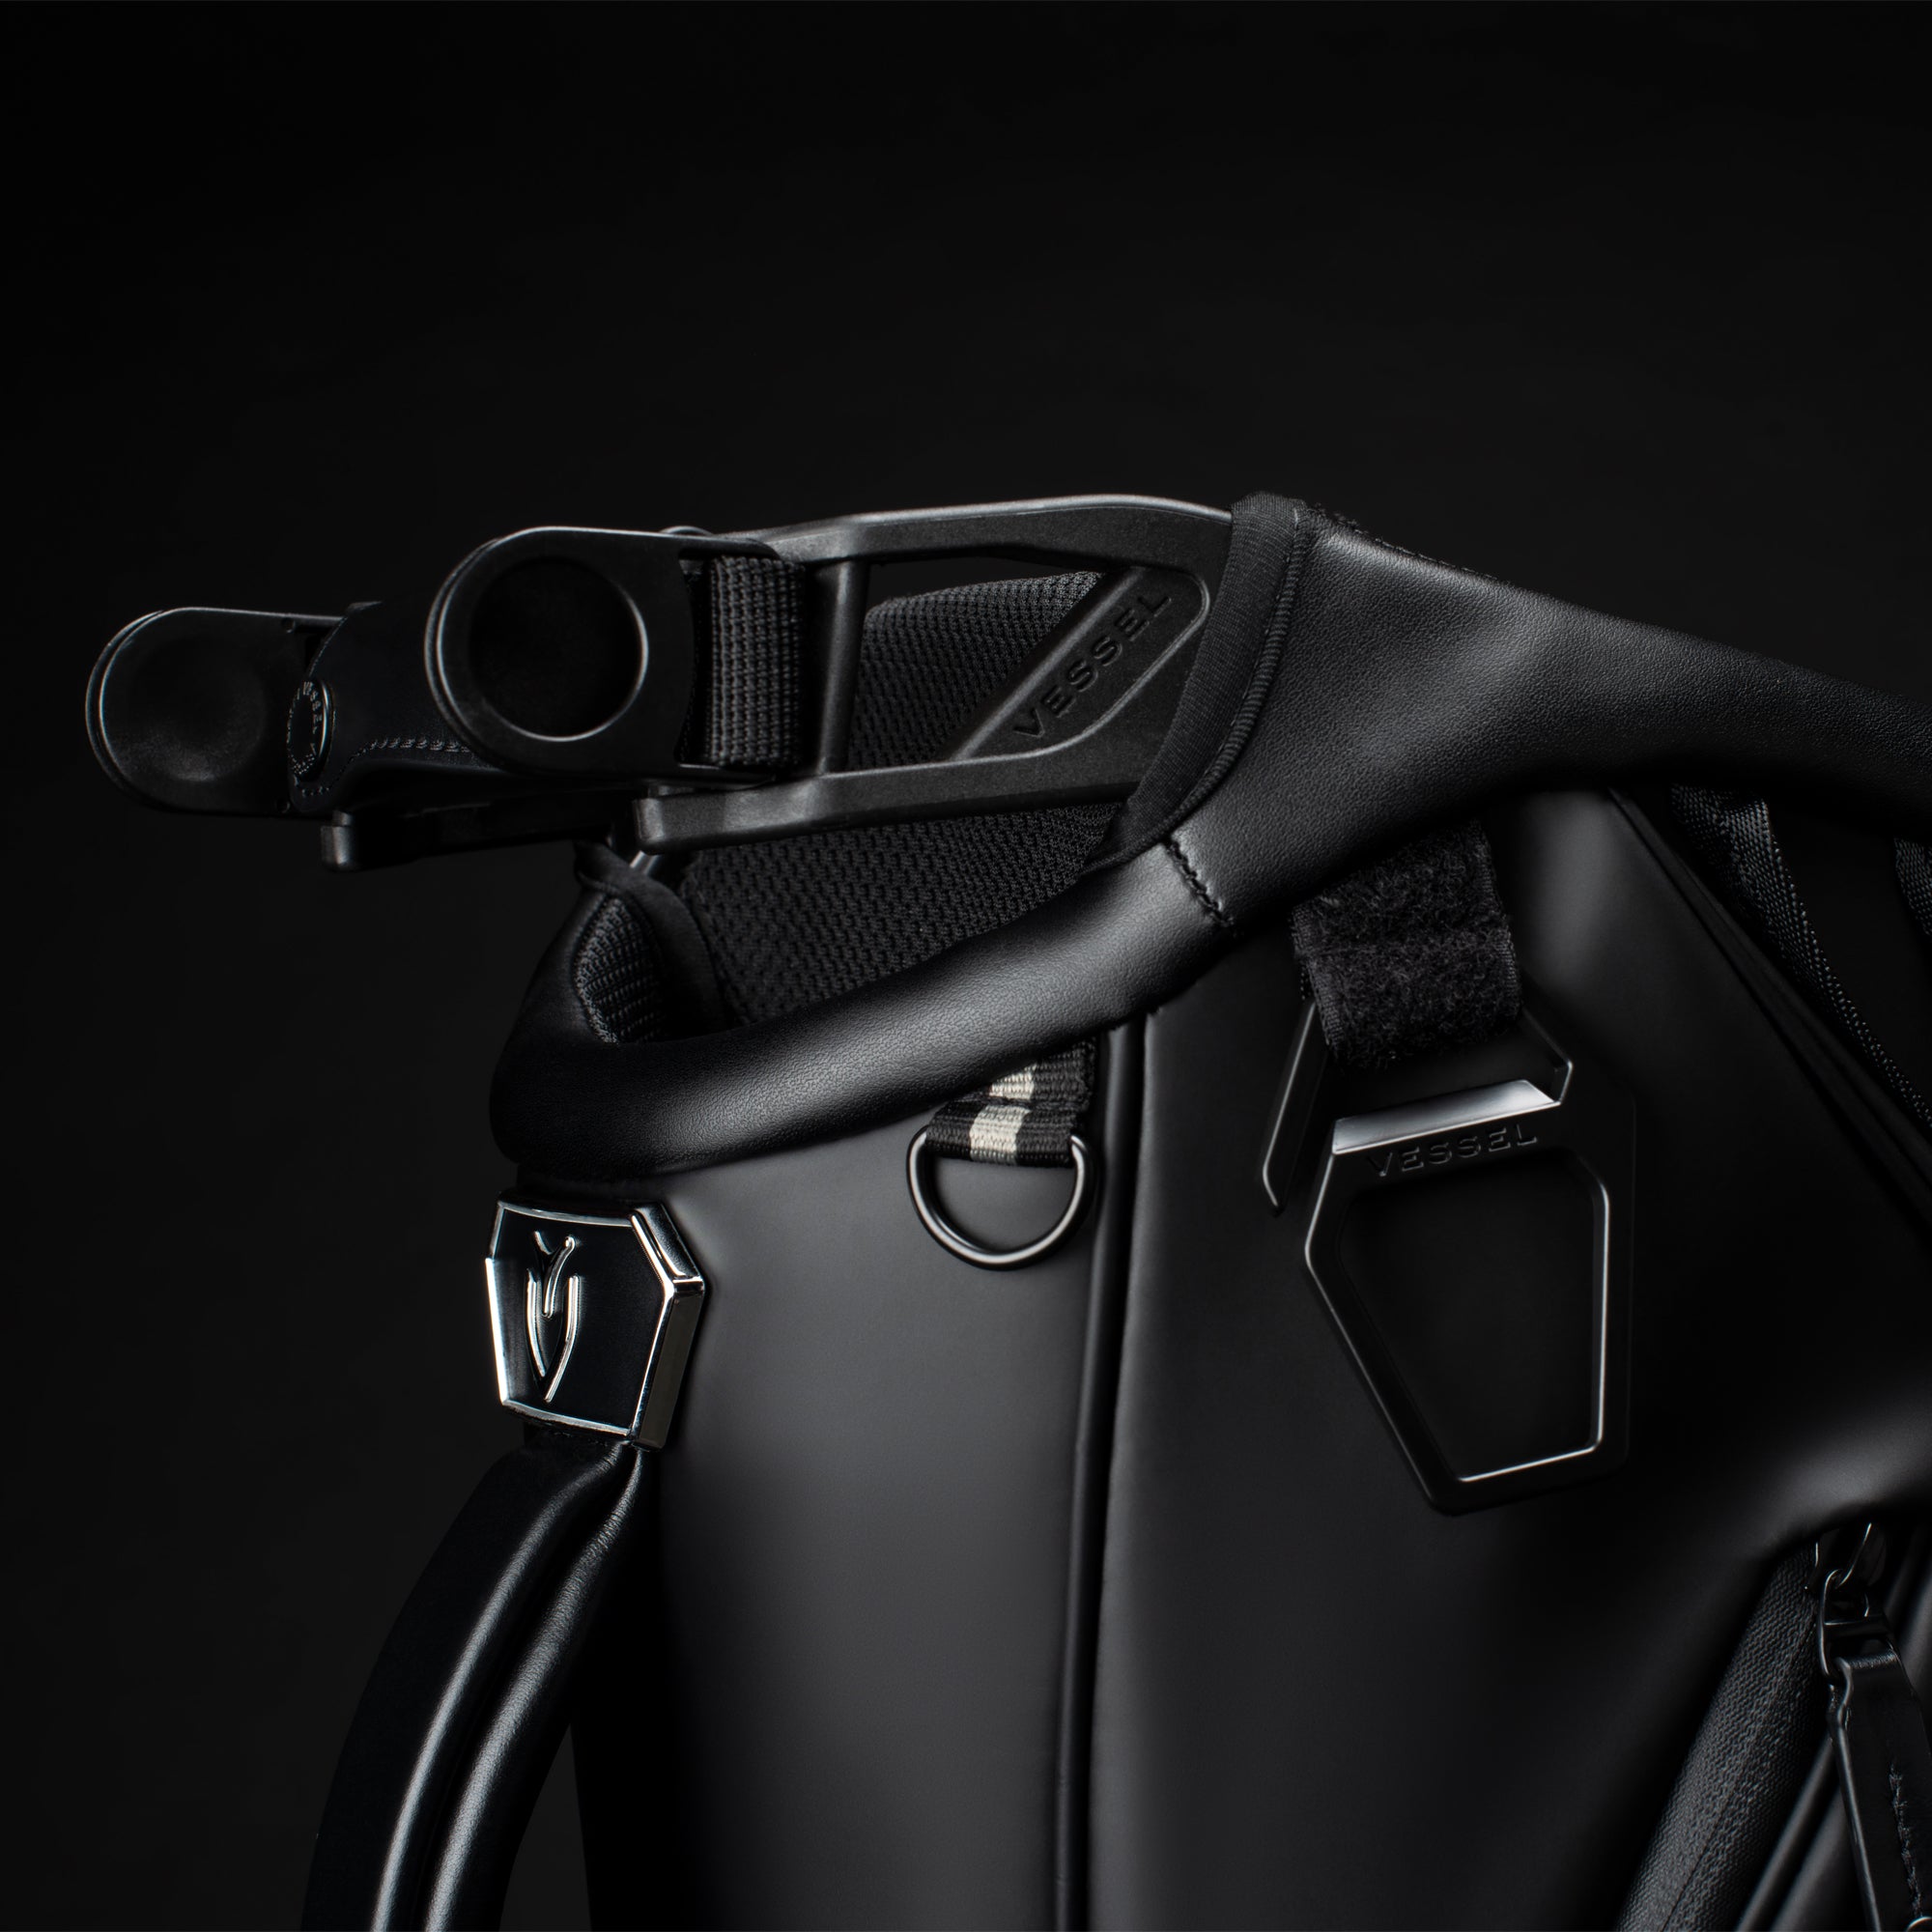 Close up photo of the high strap-attachment points on the top design of a black Player IV Pro in a black studio